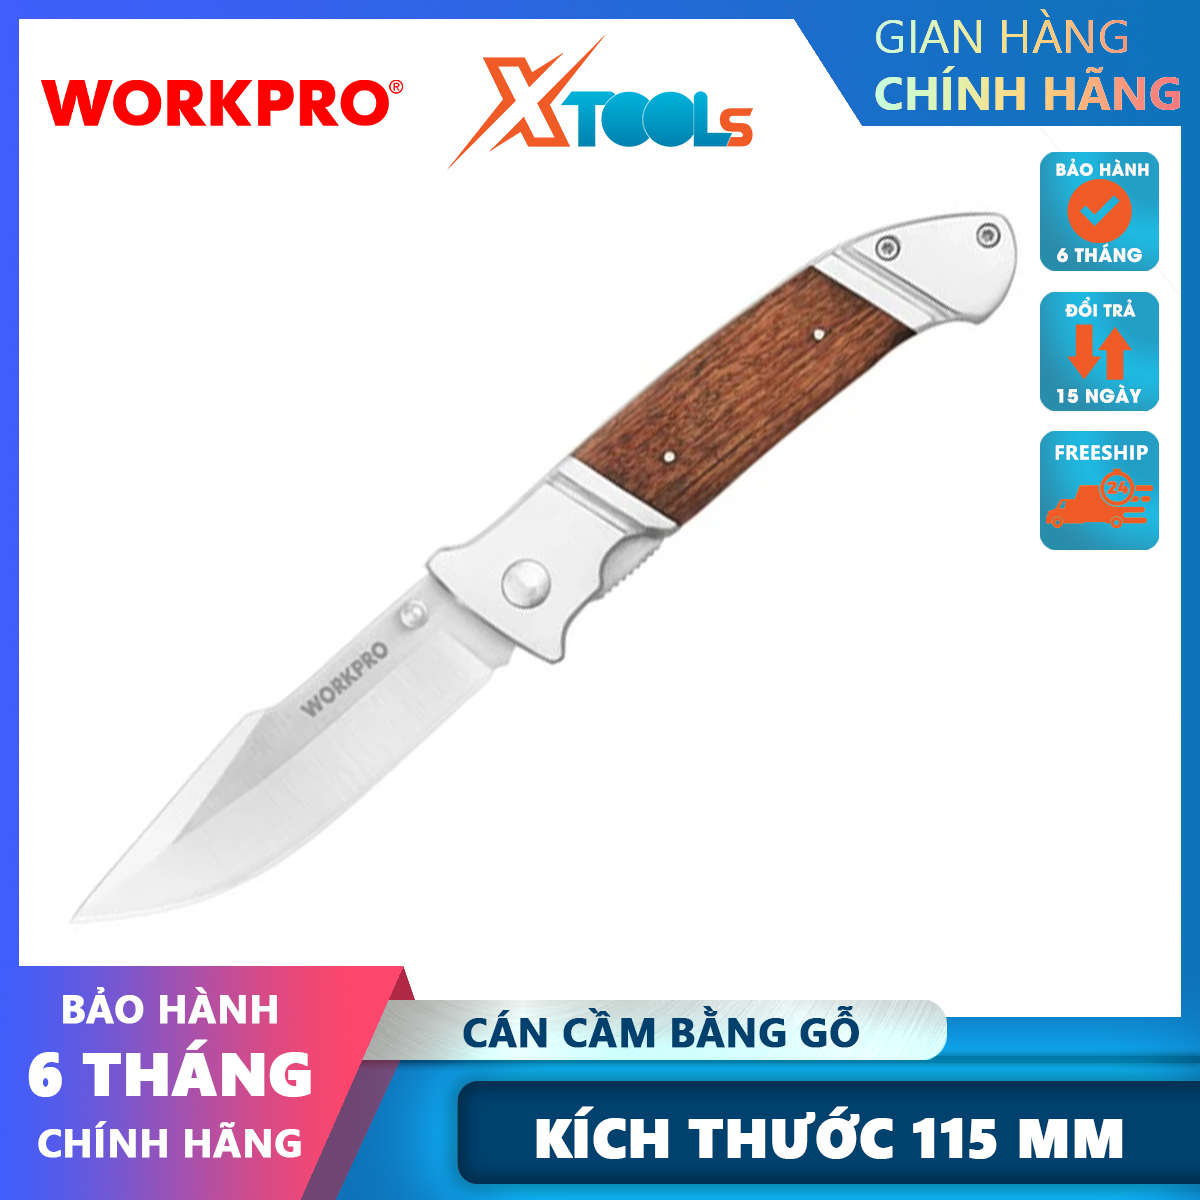 Wp381001 multi-functional electrical wire stripping knife with wood handle